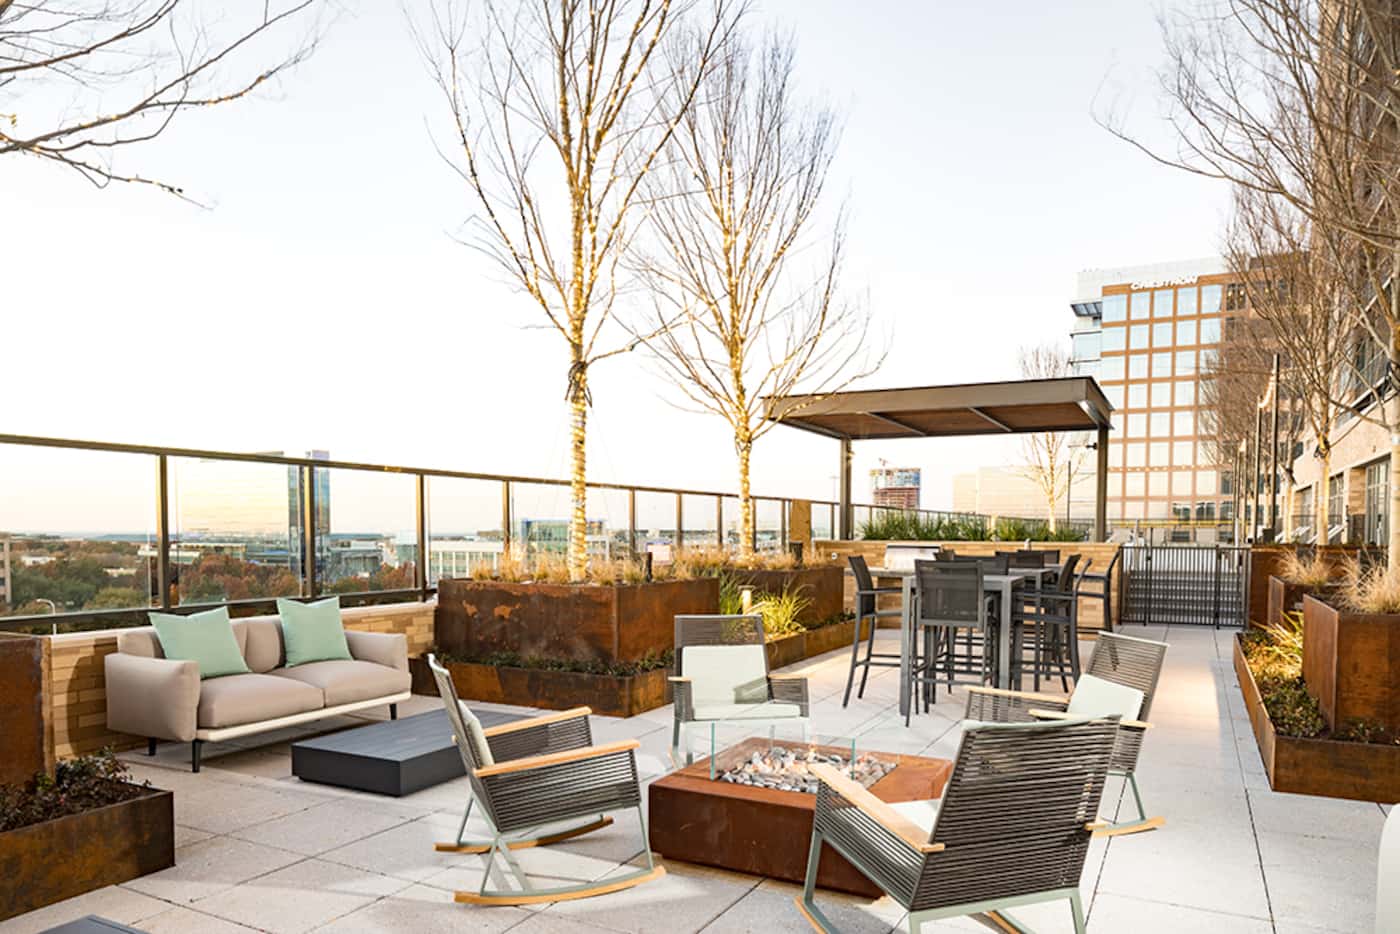 The Kincaid at Legacy apartment tower has a seventh-floor deck overlooking the neighborhood.